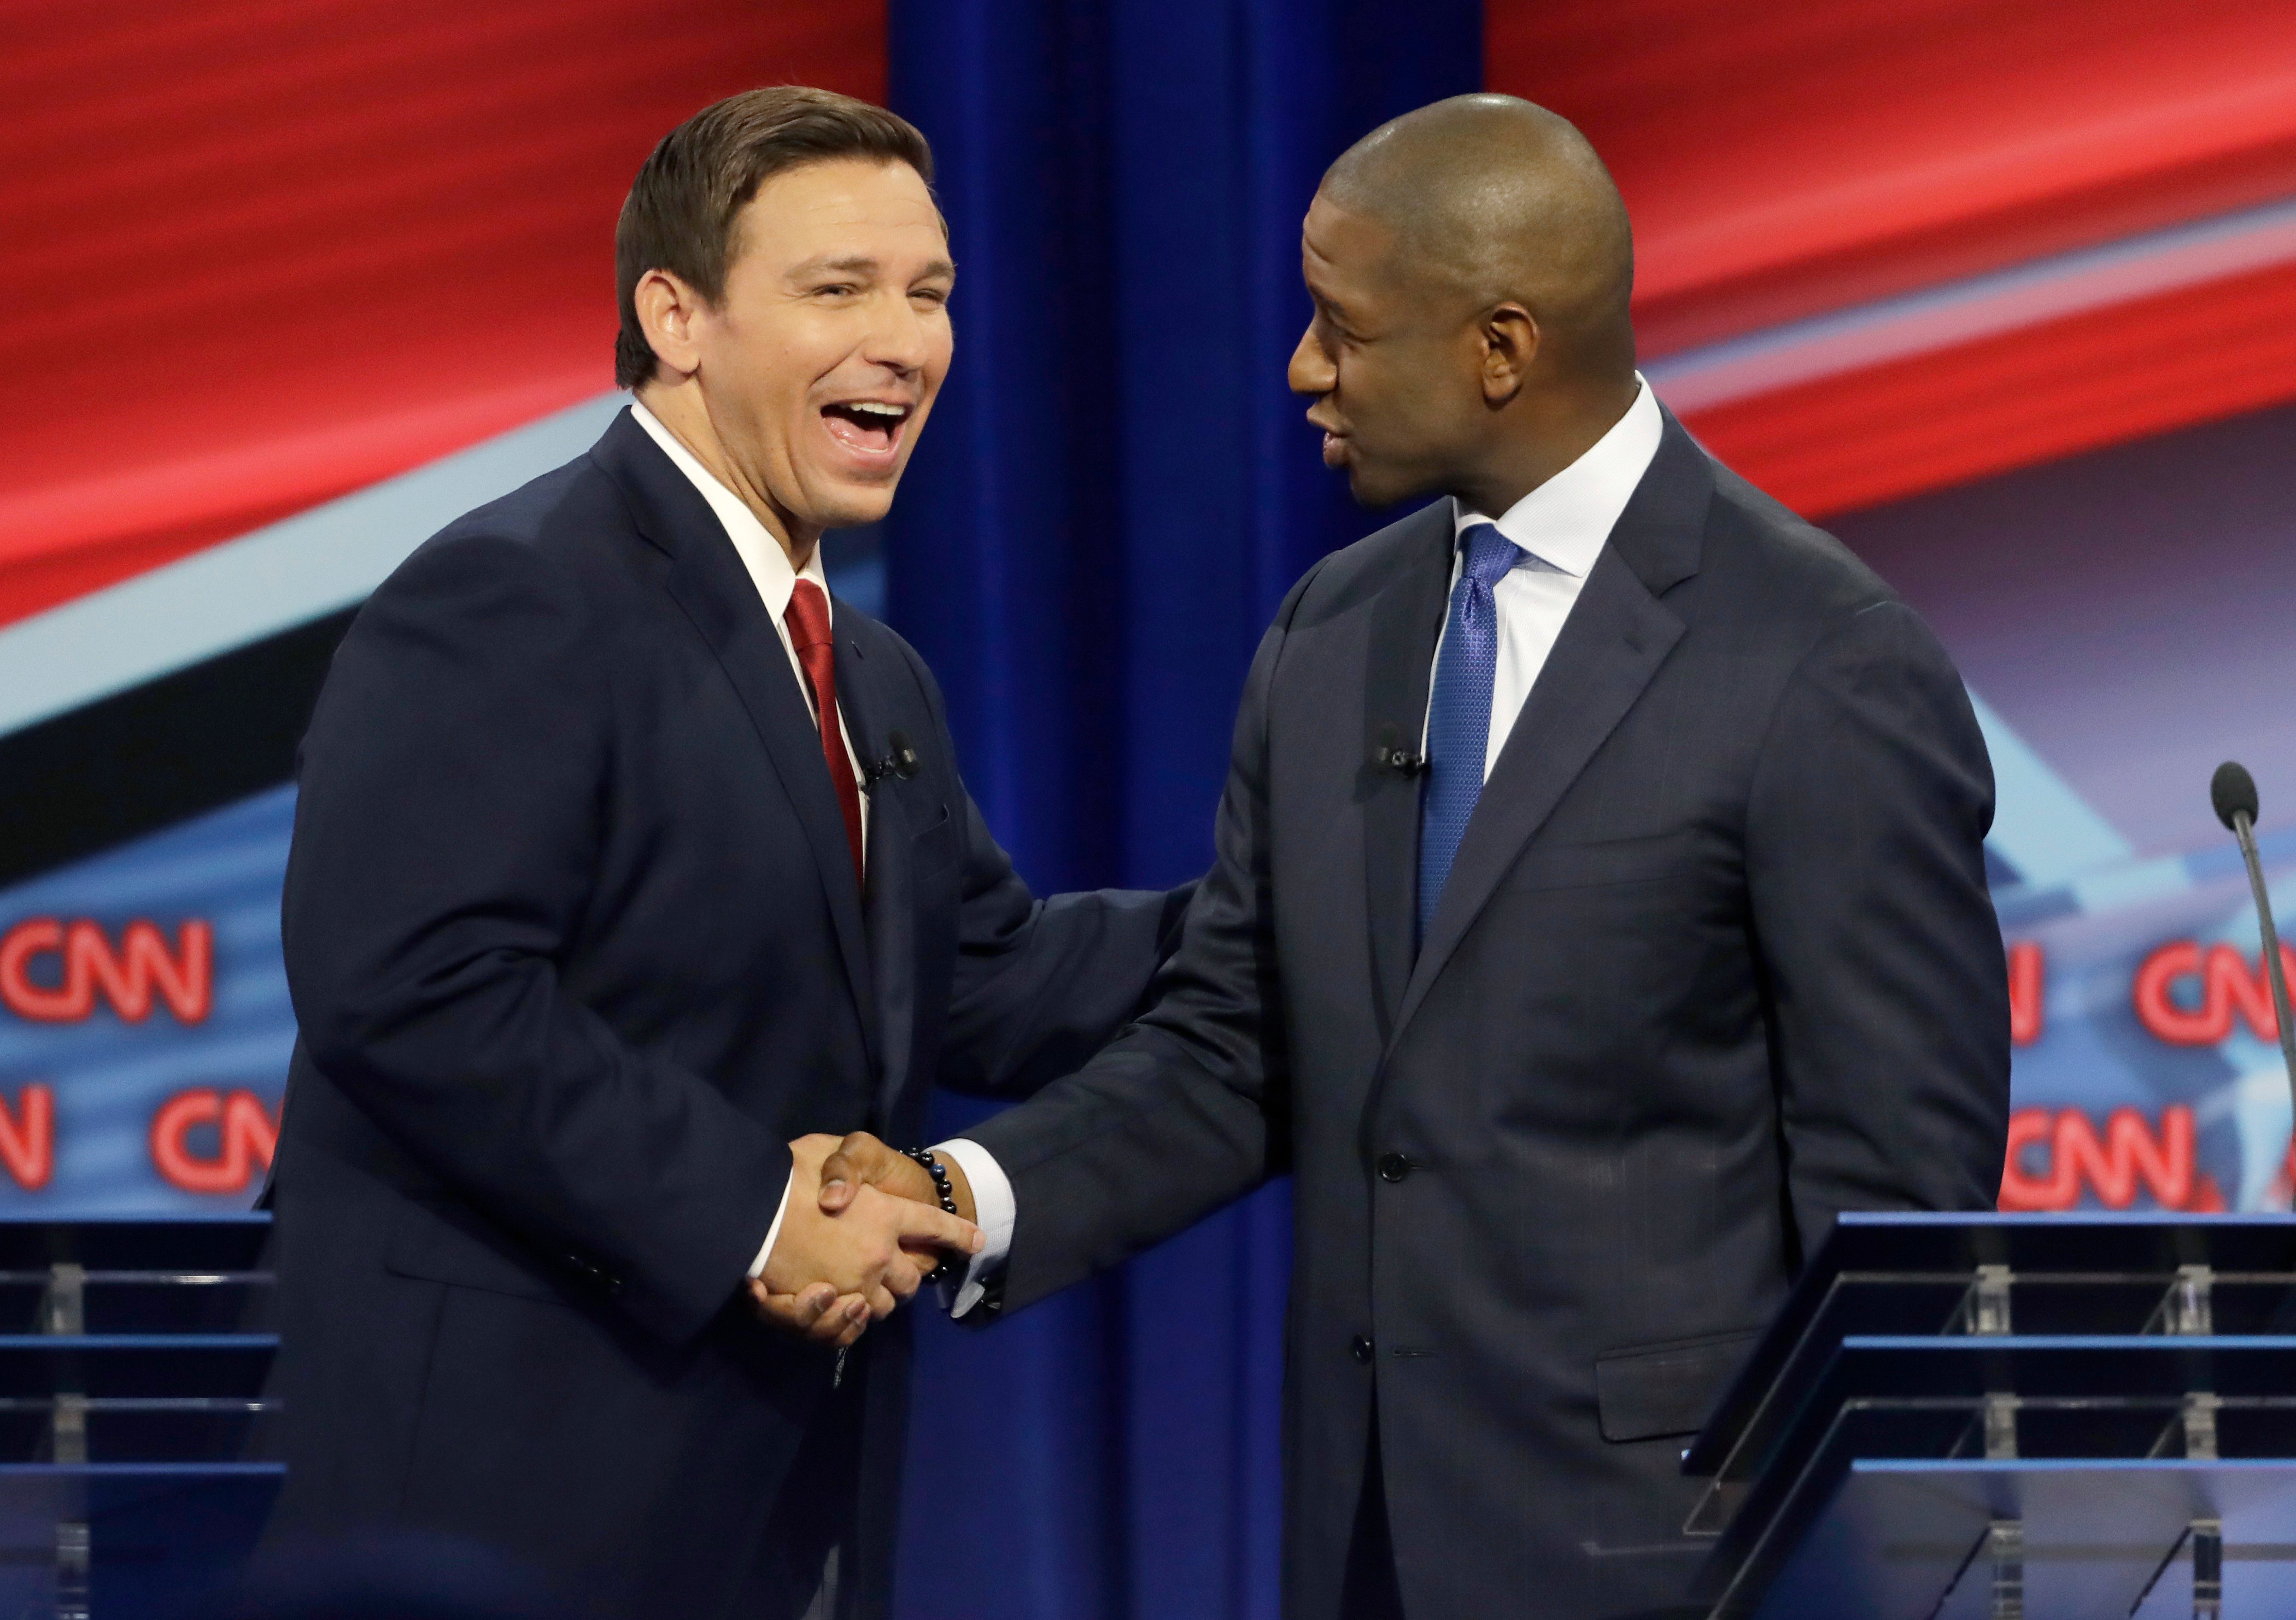 Florida Republican gubernatorial candidate Ron DeSantis, left, shakes hands with Democratic gubernatorial candidate Andrew Gillum after a CNN debate, Sunday, Oct. 21, 2018, in Tampa, Fla. (Chris O'Meara-Pool/Getty Images)